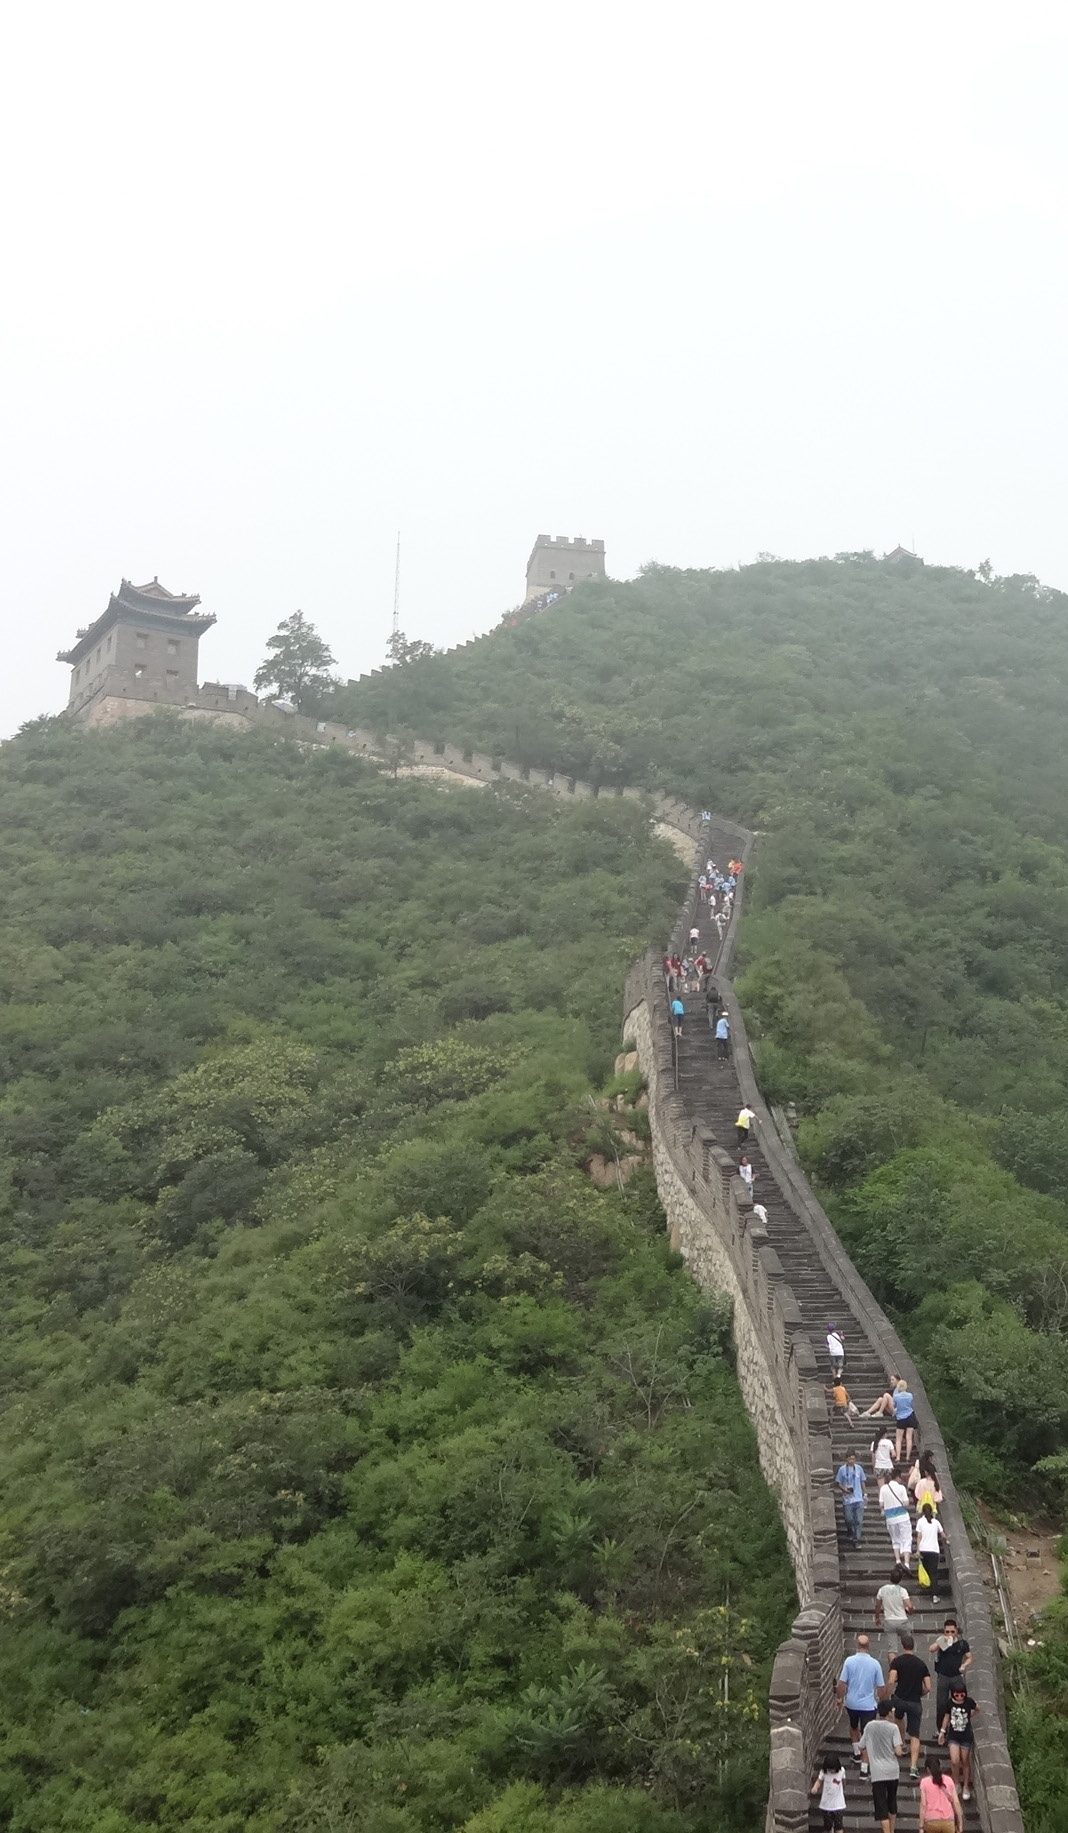 BIEE 2014 Summer Camp | Great Wall of China 01 by Tyler Fairbrother